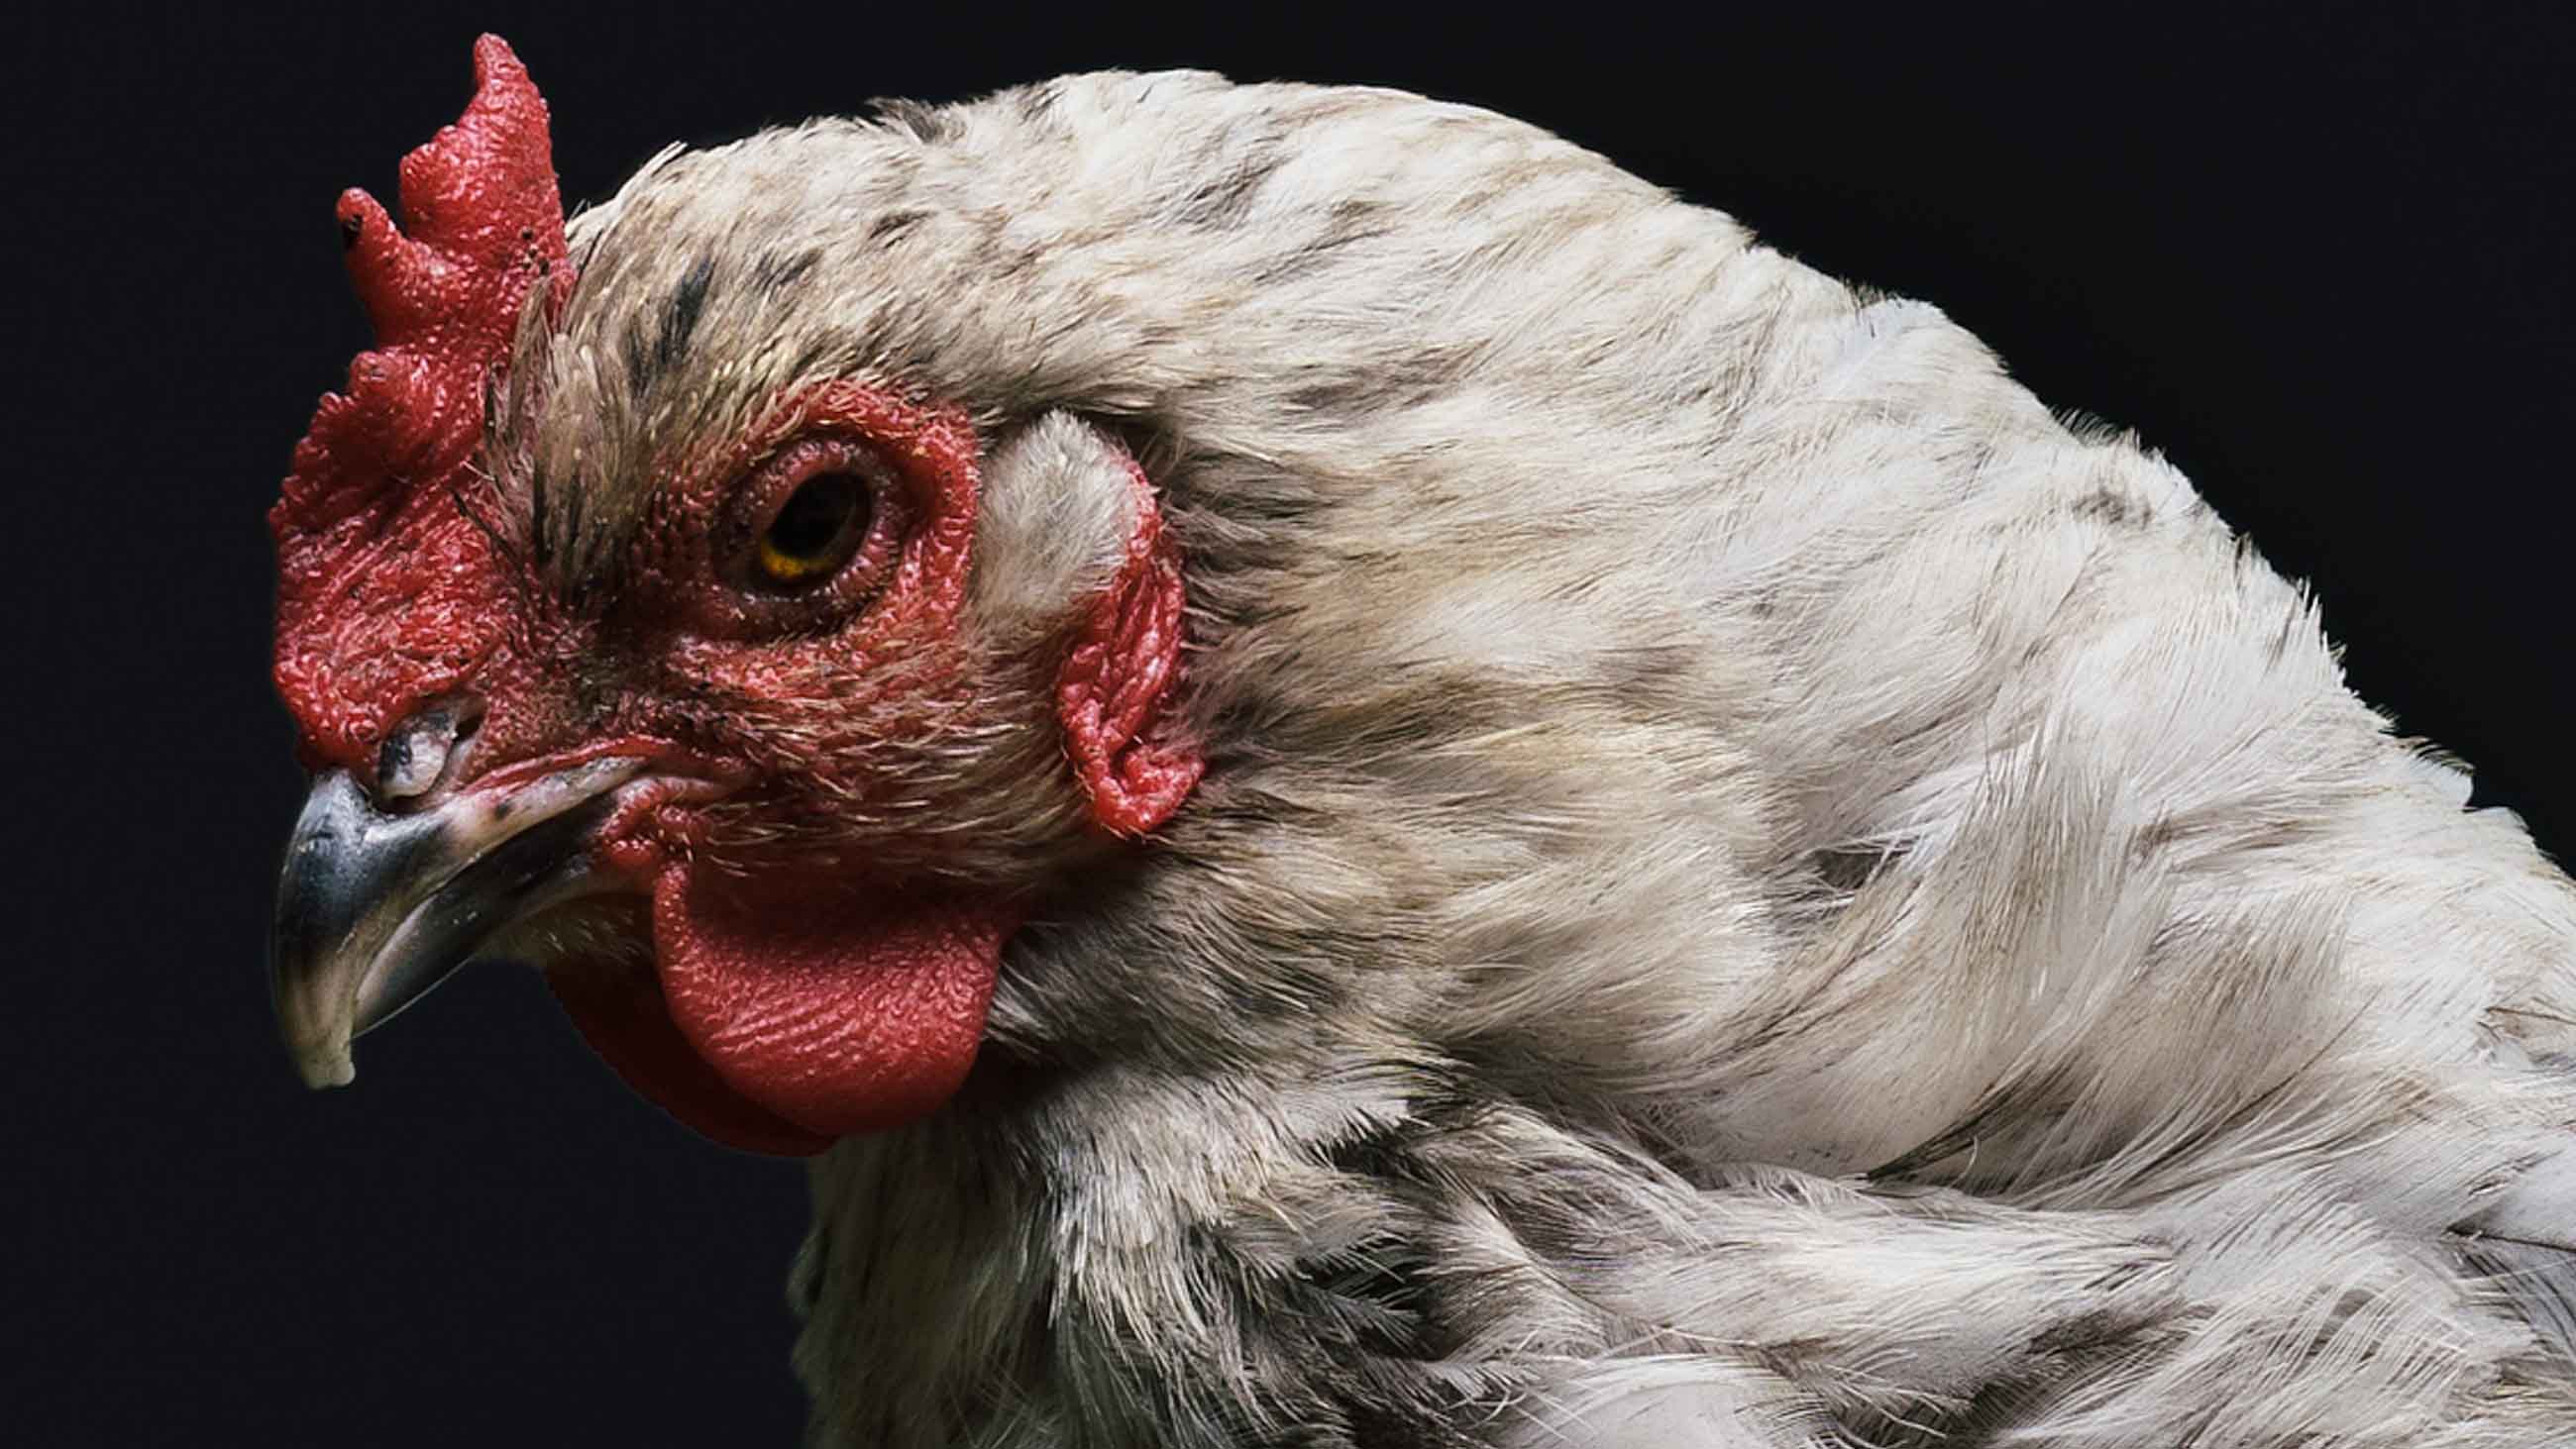 Thomas Jukes wanted to know what chickens needed to eat to thrive in confinement. By an accident of history, that question was more important than ever.